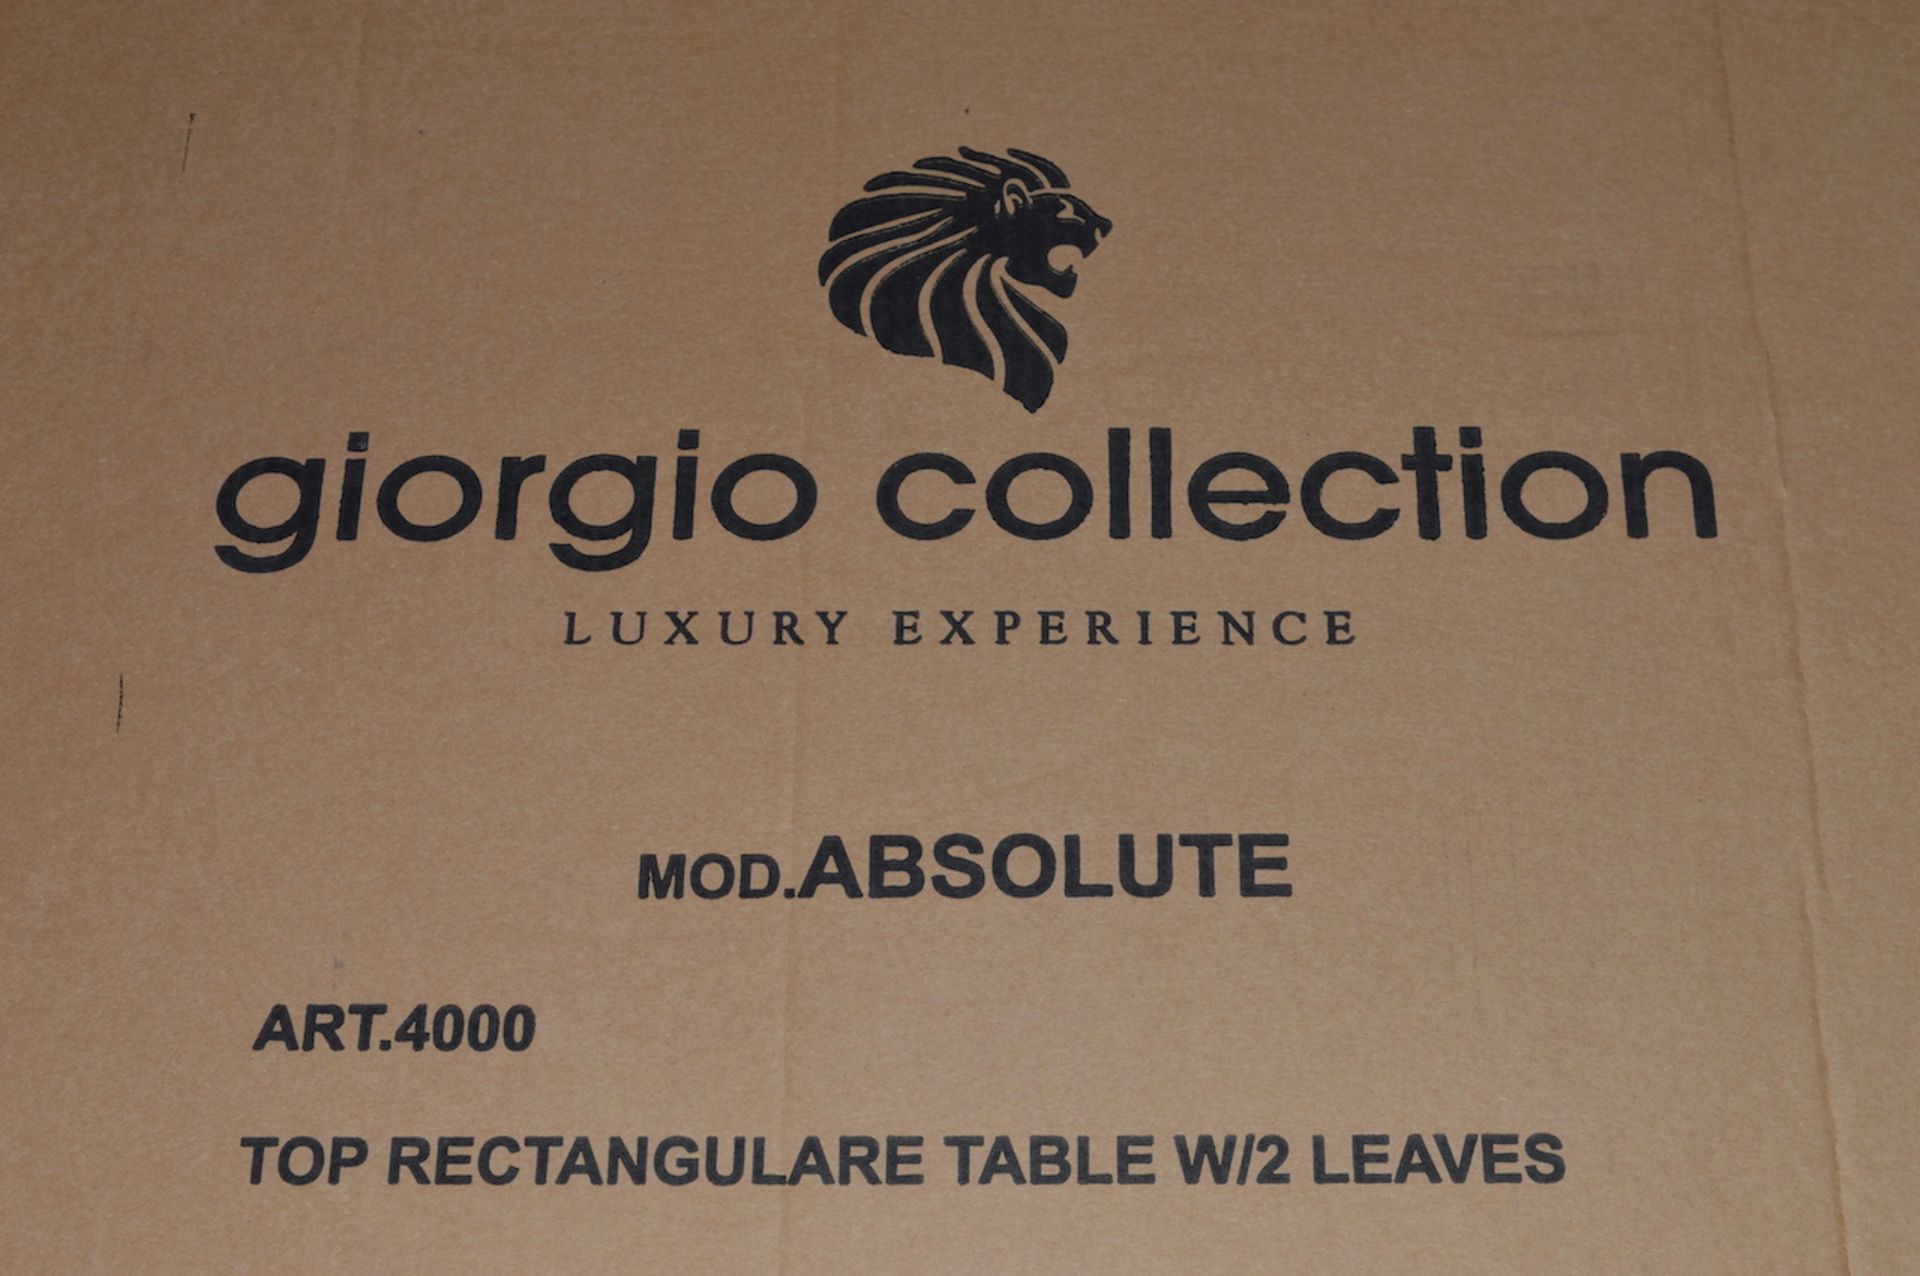 1 x Giorgio Absolute Dining Extension Table 4000 – Mako Japanese Tamos Burl Veneer With a High Gloss - Image 20 of 23